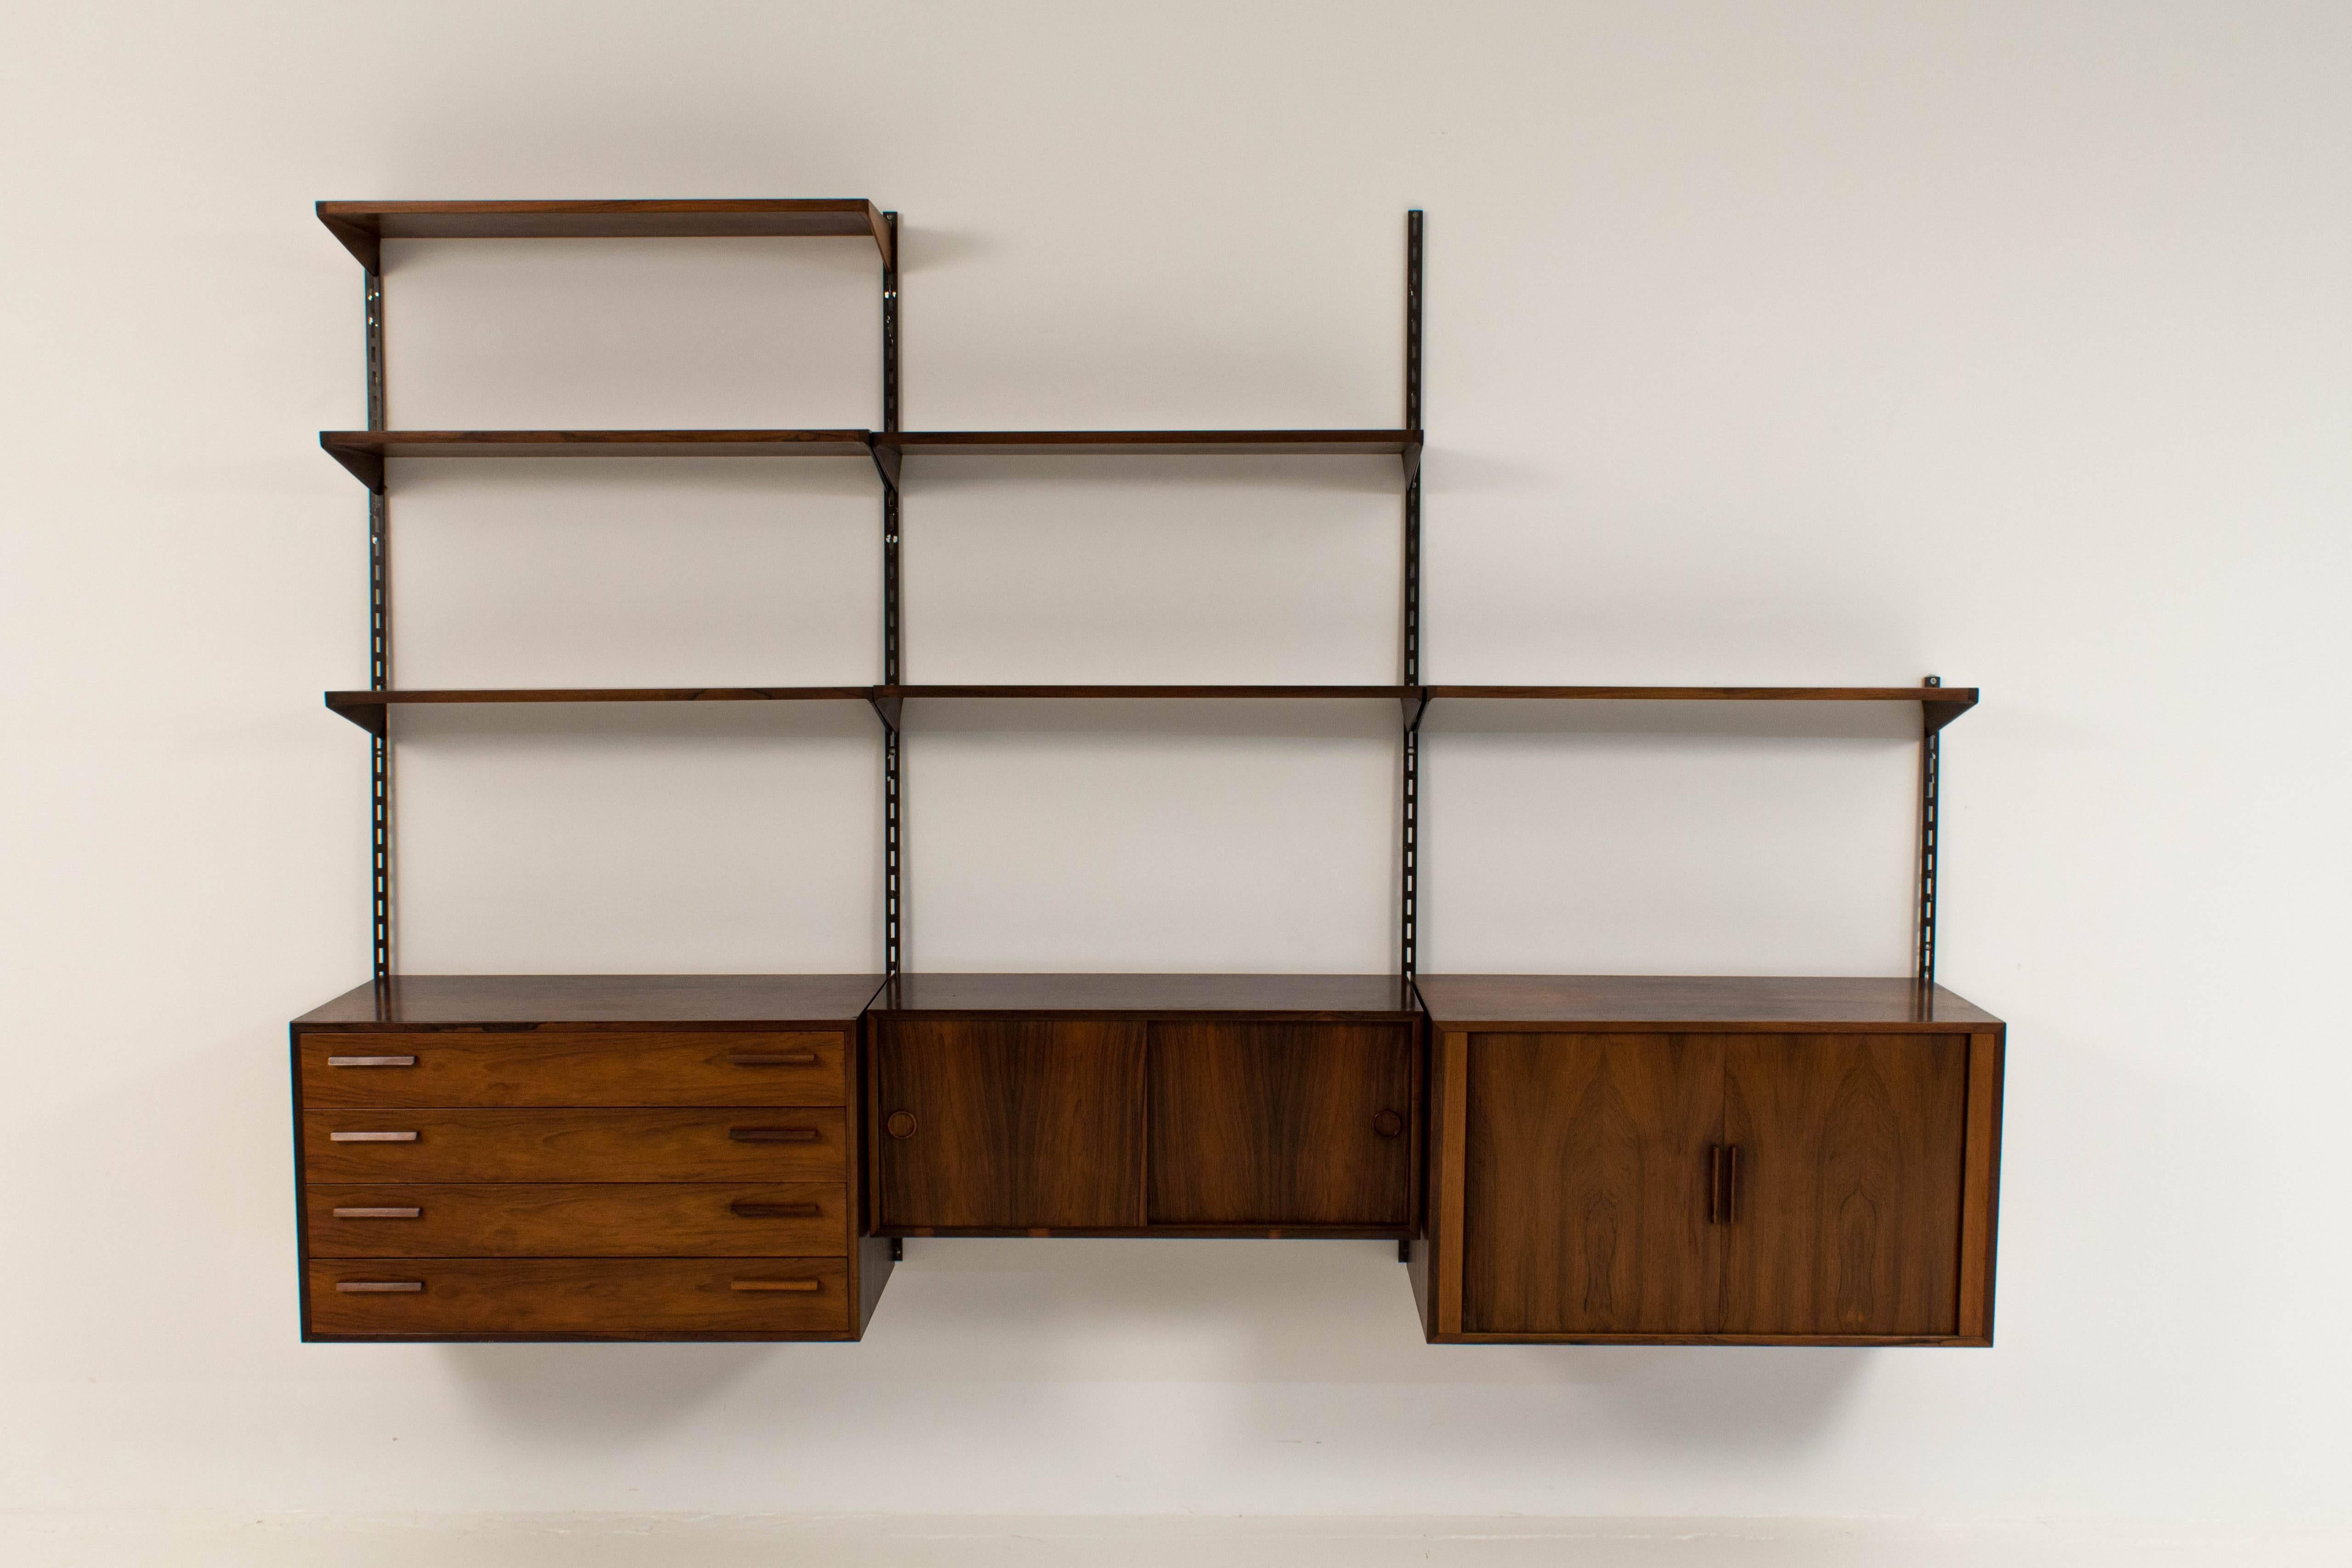 Stylish rosewood wall-mounted shelving unit by Kai Kristiansen for FM Møbler.
Six original rosewood shelves.
Original cabinet with four drawers.
Original cabinet with two sliding doors.
Original cabinet with two blind doors.

In good condition